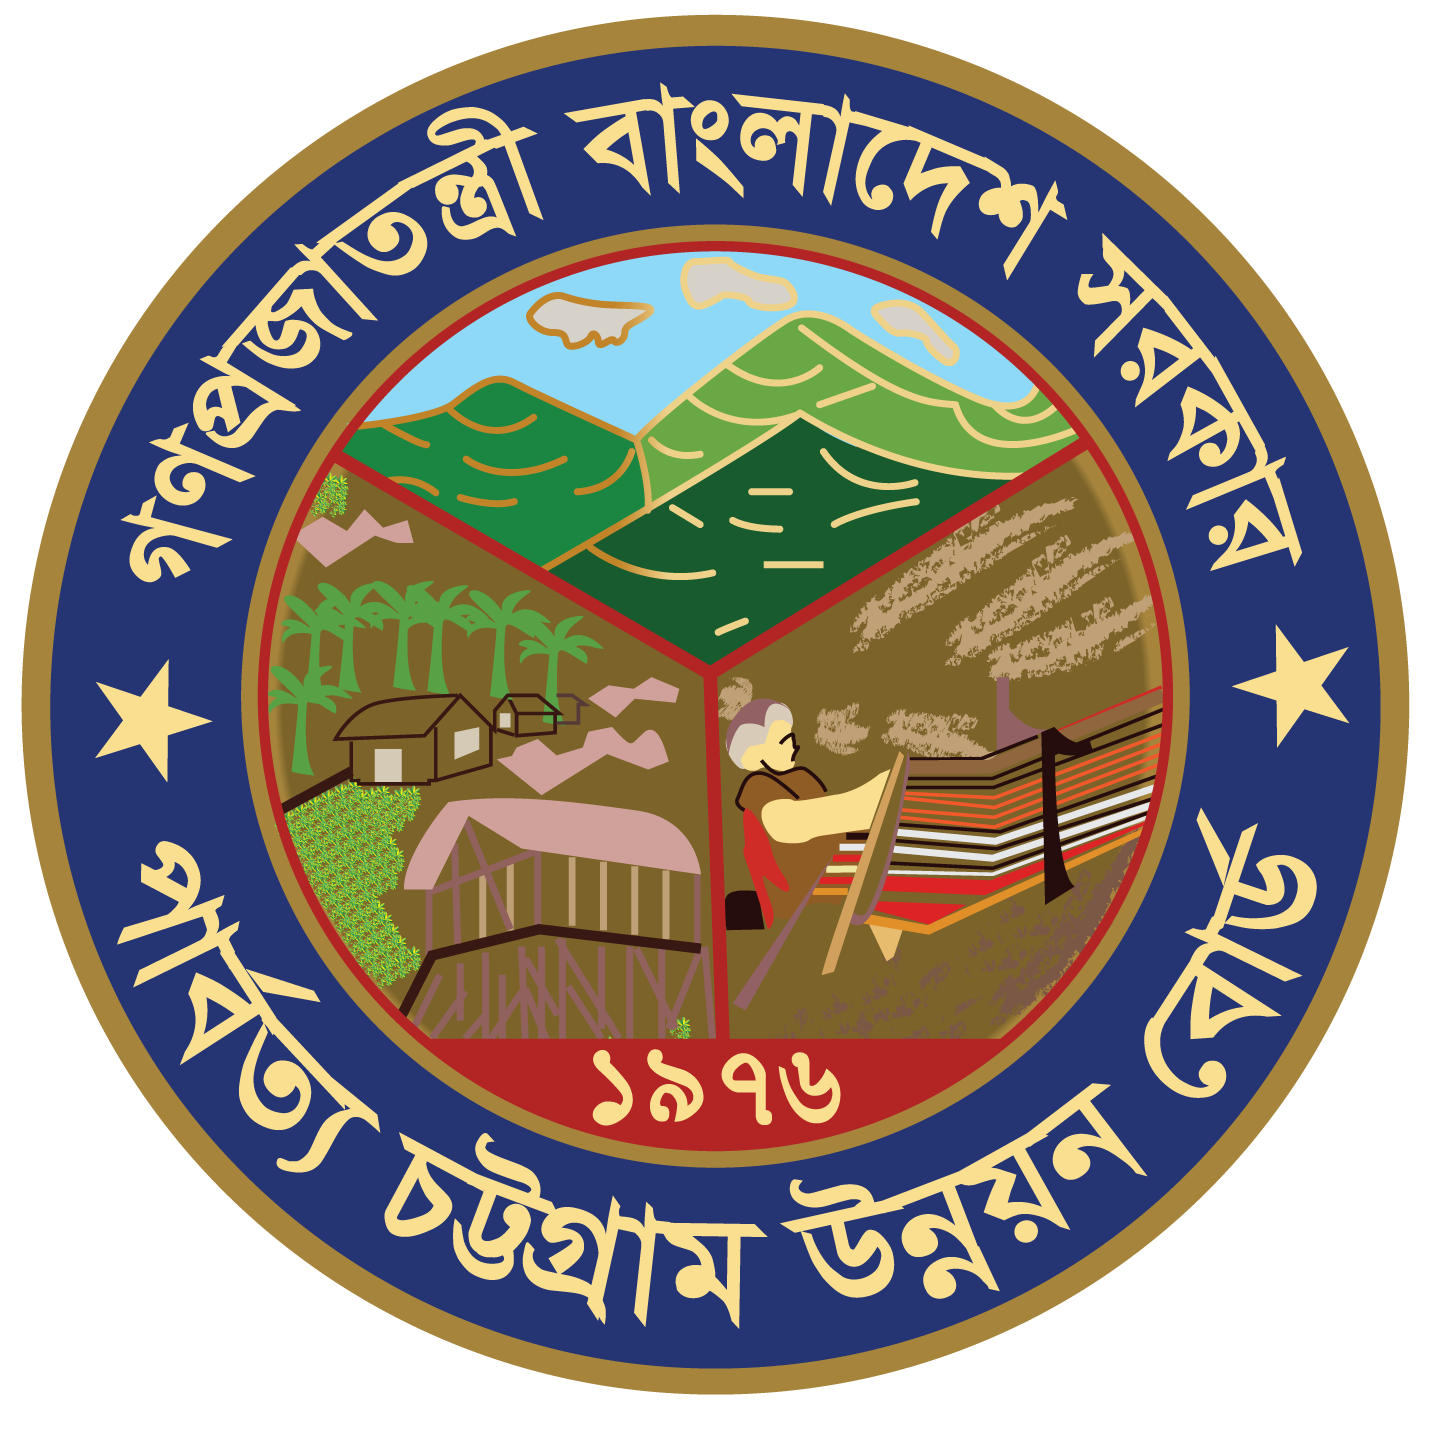 Chittagong Hill Tracts Development Board